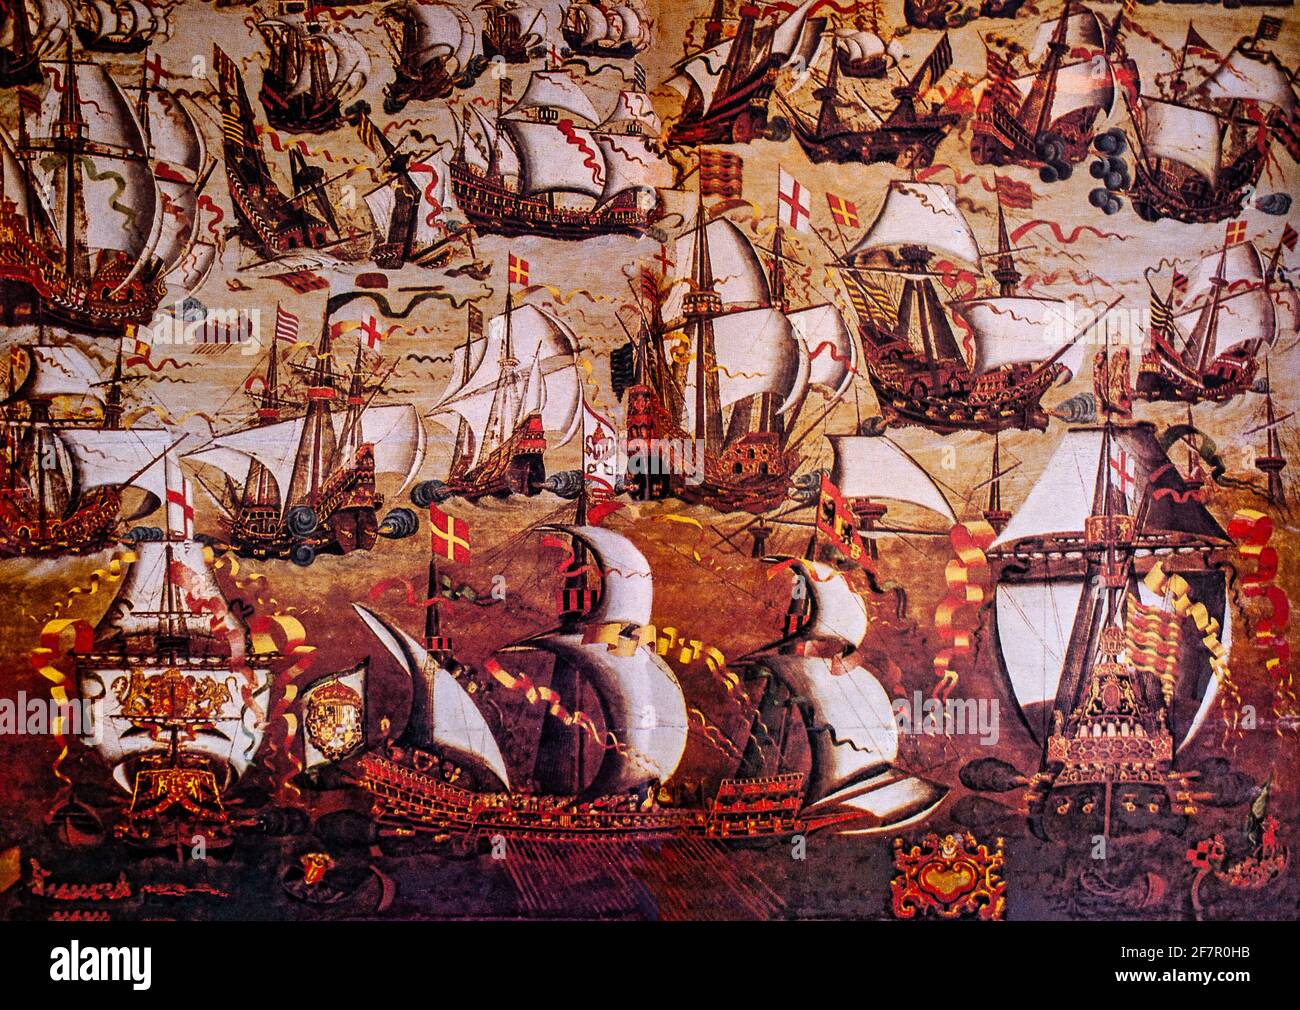 An illustration completed by an unknown draughtsman, of the Spanish Armada that set sail for England after decades of hostility between Spain's catholic King Philip II and the protestant Queen Elizabeth I, in the summer of 1588.  The painting  appears less like a painting than as a formal design in a mannered style but no other contemporary image of the Armada conveys a comparable sense of the drama and colour of the confrontation between the two fleets most likely to be the action of Gravelines, the only point at which large numbers of ships from both sides were engaged in sustained conflict. Stock Photo